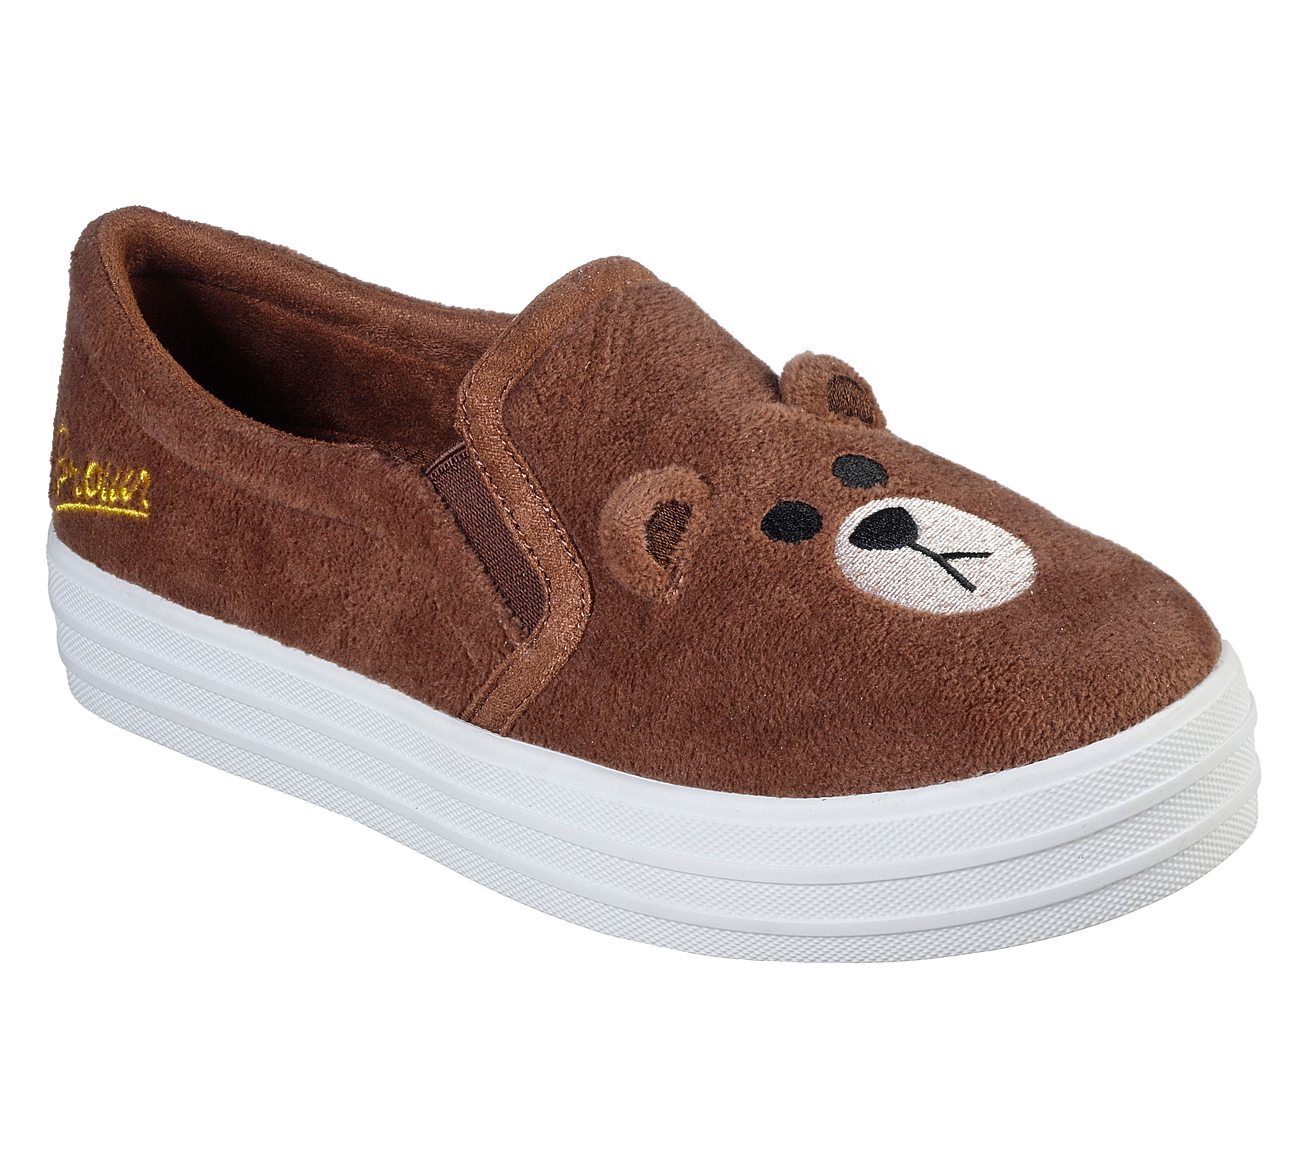 Plush Pals Slip-On Sneakers Shoes